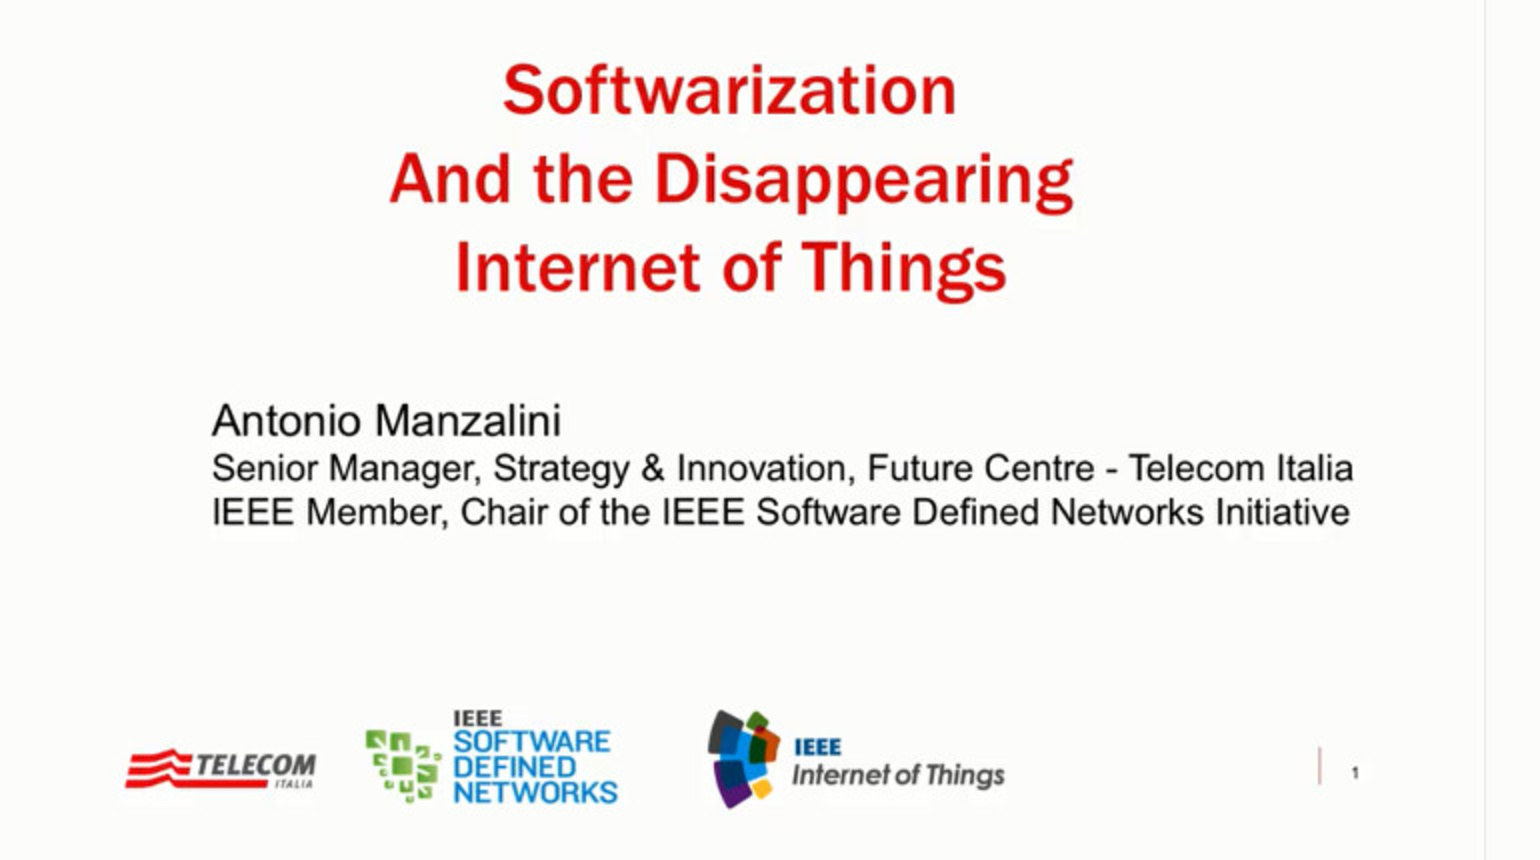 Softwarization and the Disappearing Internet of Things